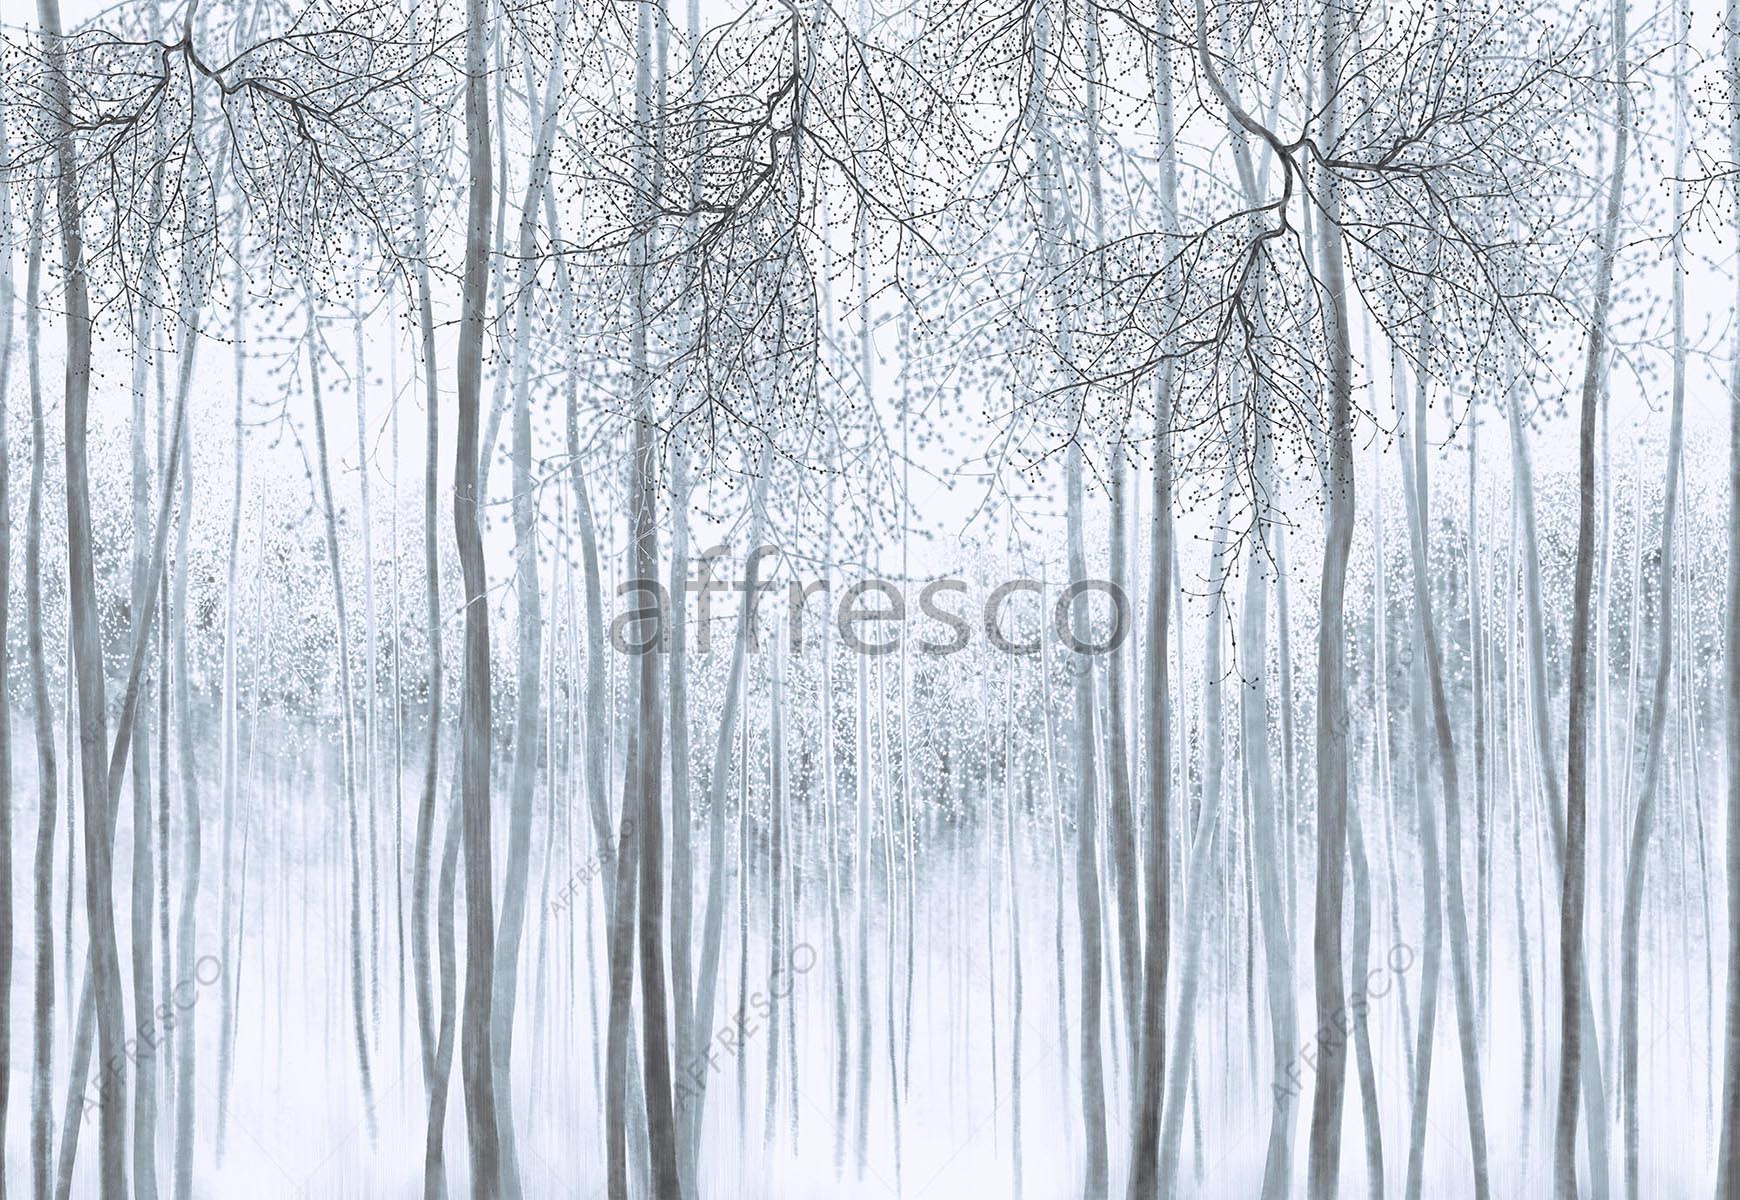 ID139255 | Forest | Epping Forest | Affresco Factory